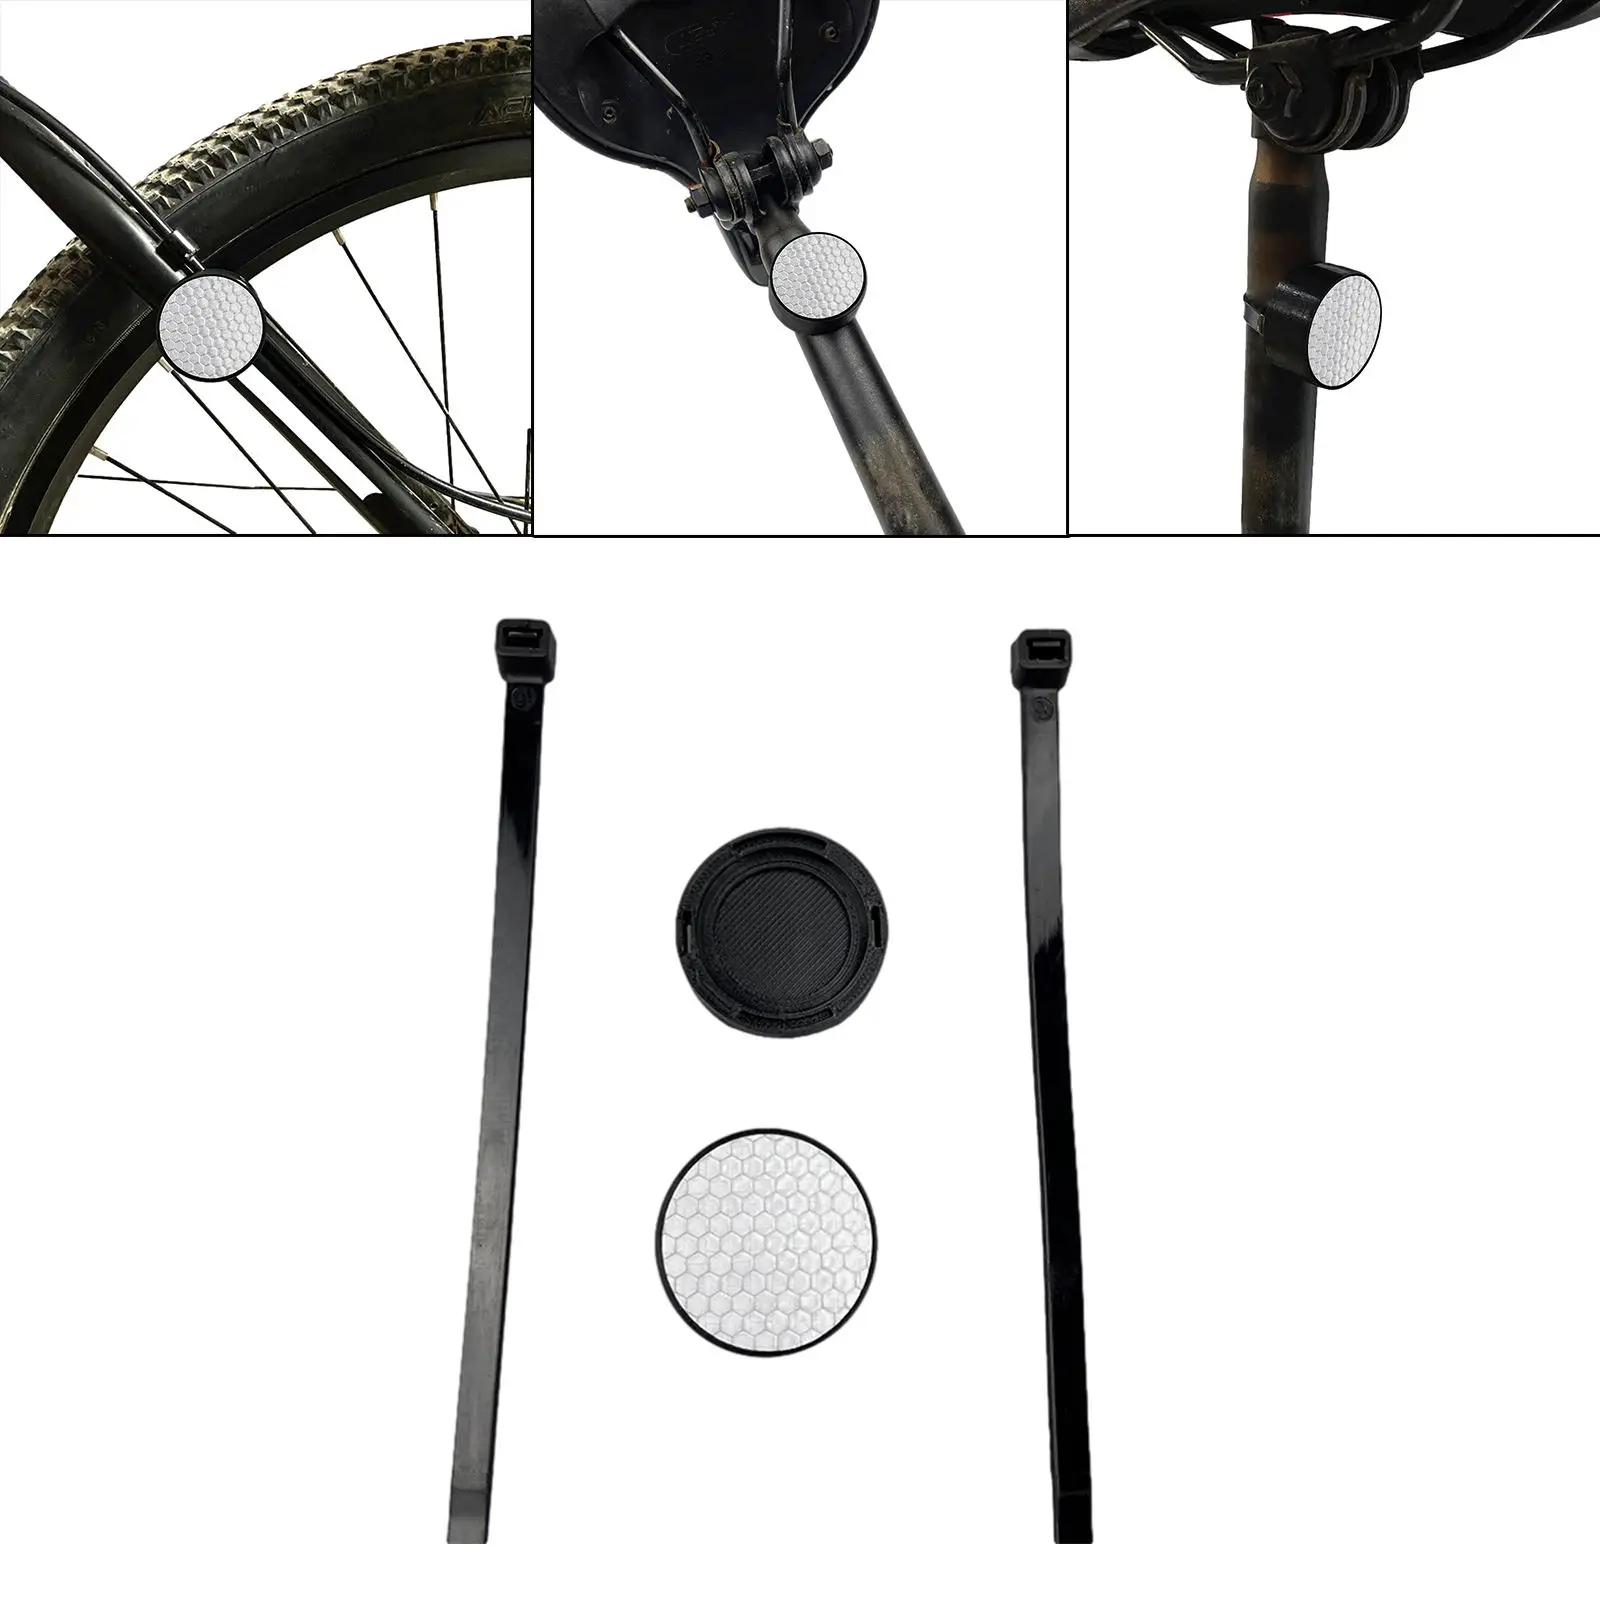 Bike Reflector Accessories Safety under Seat Tracking Locator Hidden Bracket for Holder Road Bicycle